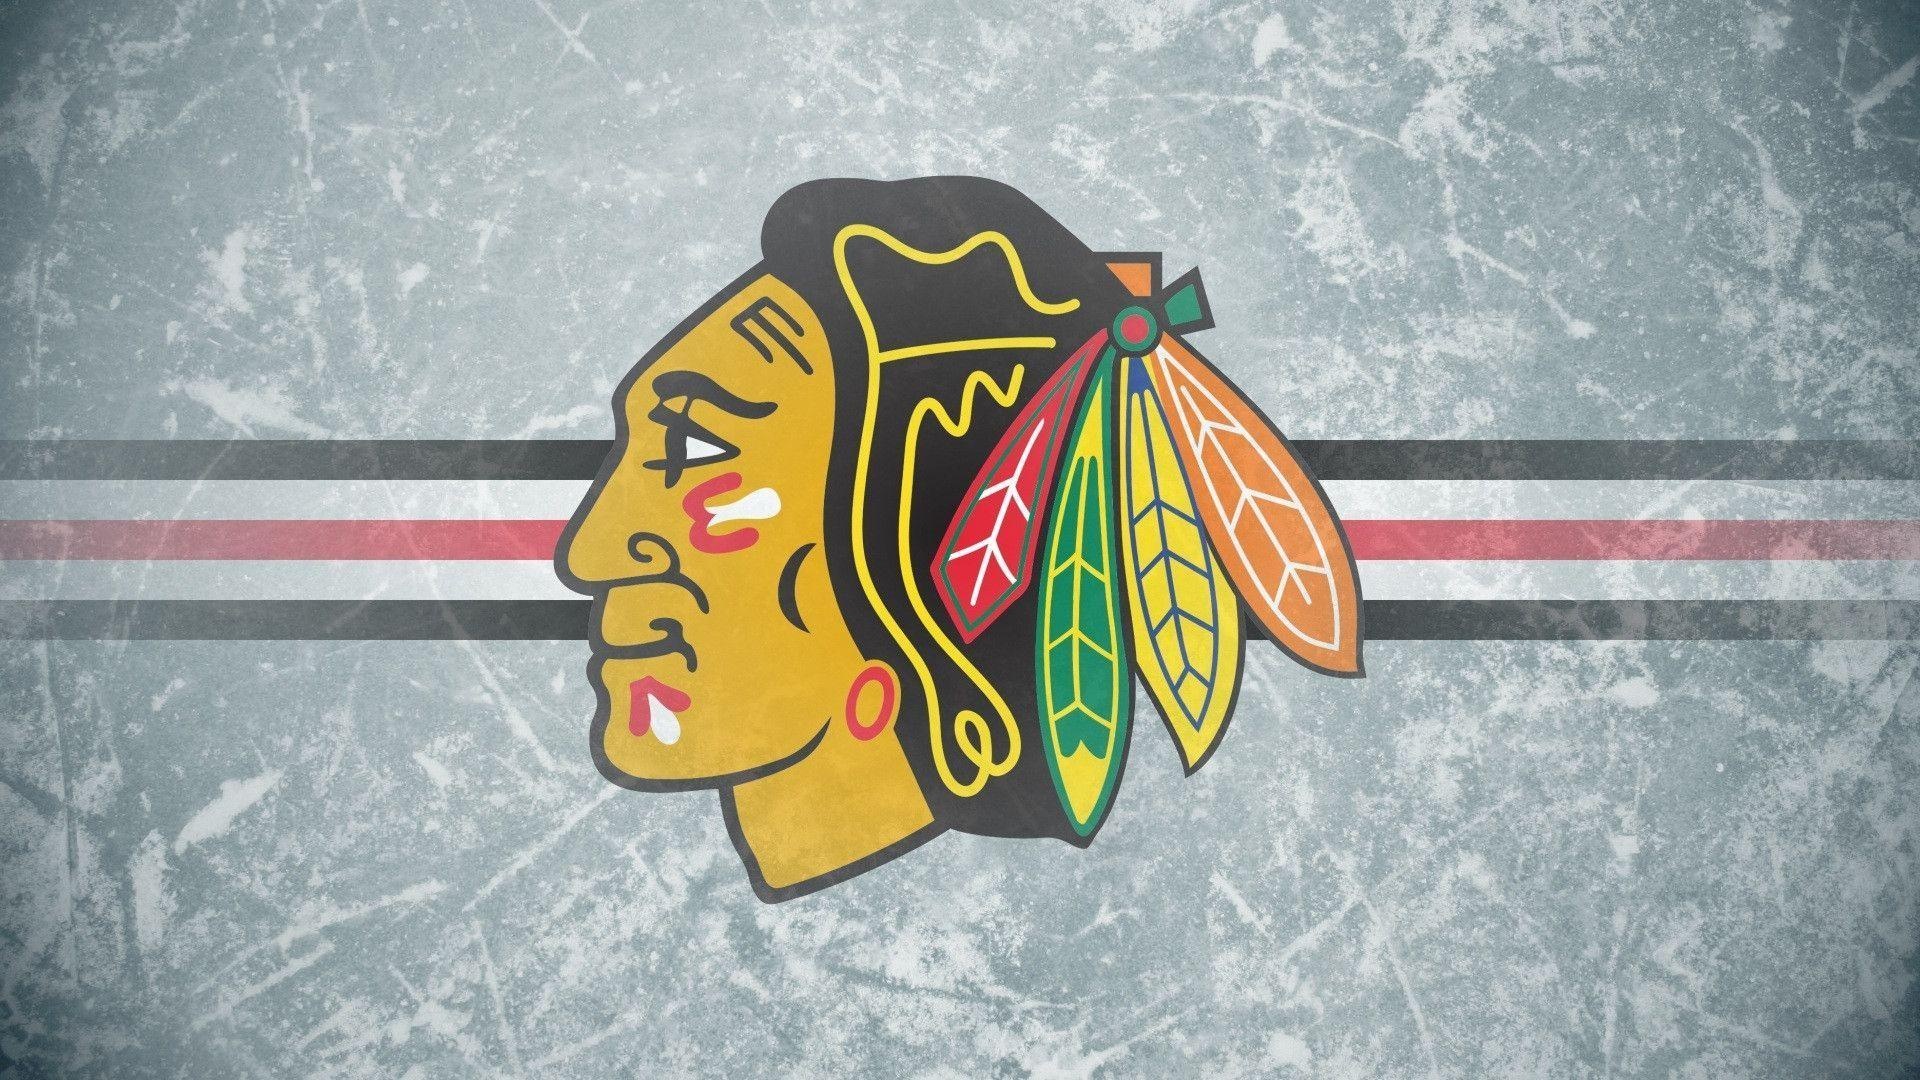 Chicago Blackhawks: A Major League hockey team based in Chicago, IL playing in the National Hockey League from 1926 to 2023. 1920x1080 Full HD Wallpaper.